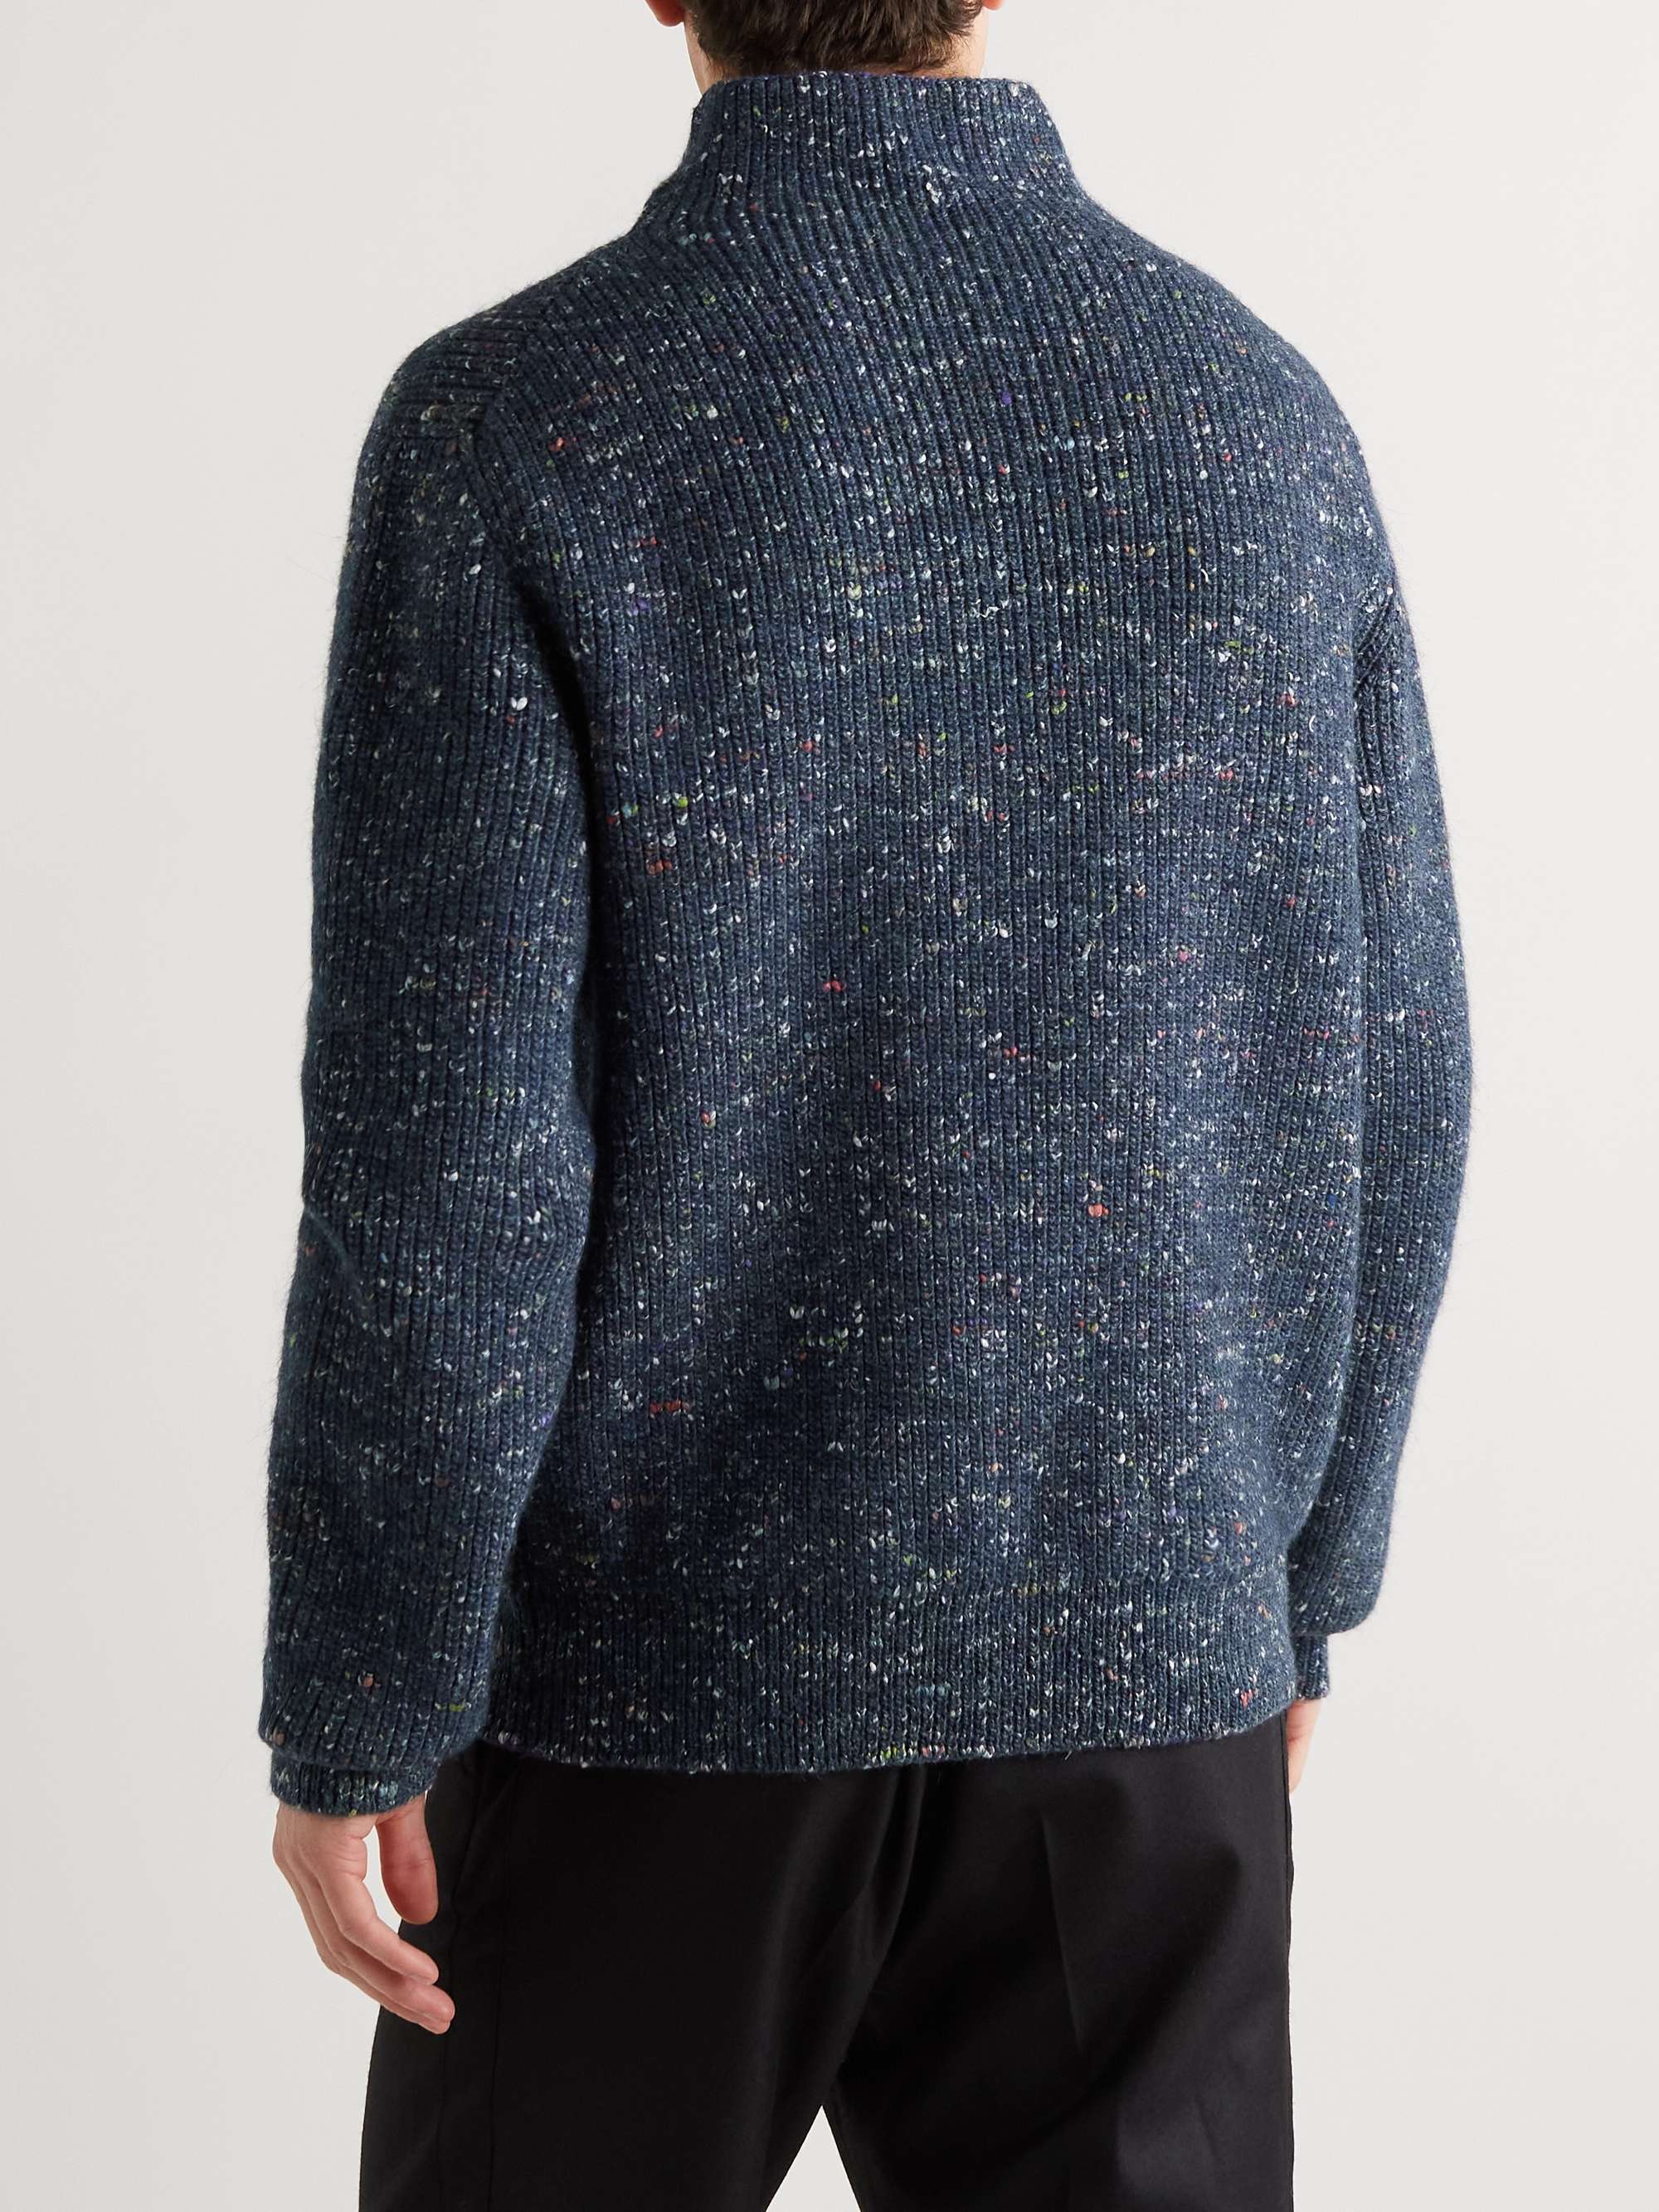 MR P. Ribbed Donegal Merino Wool-Blend Sweater